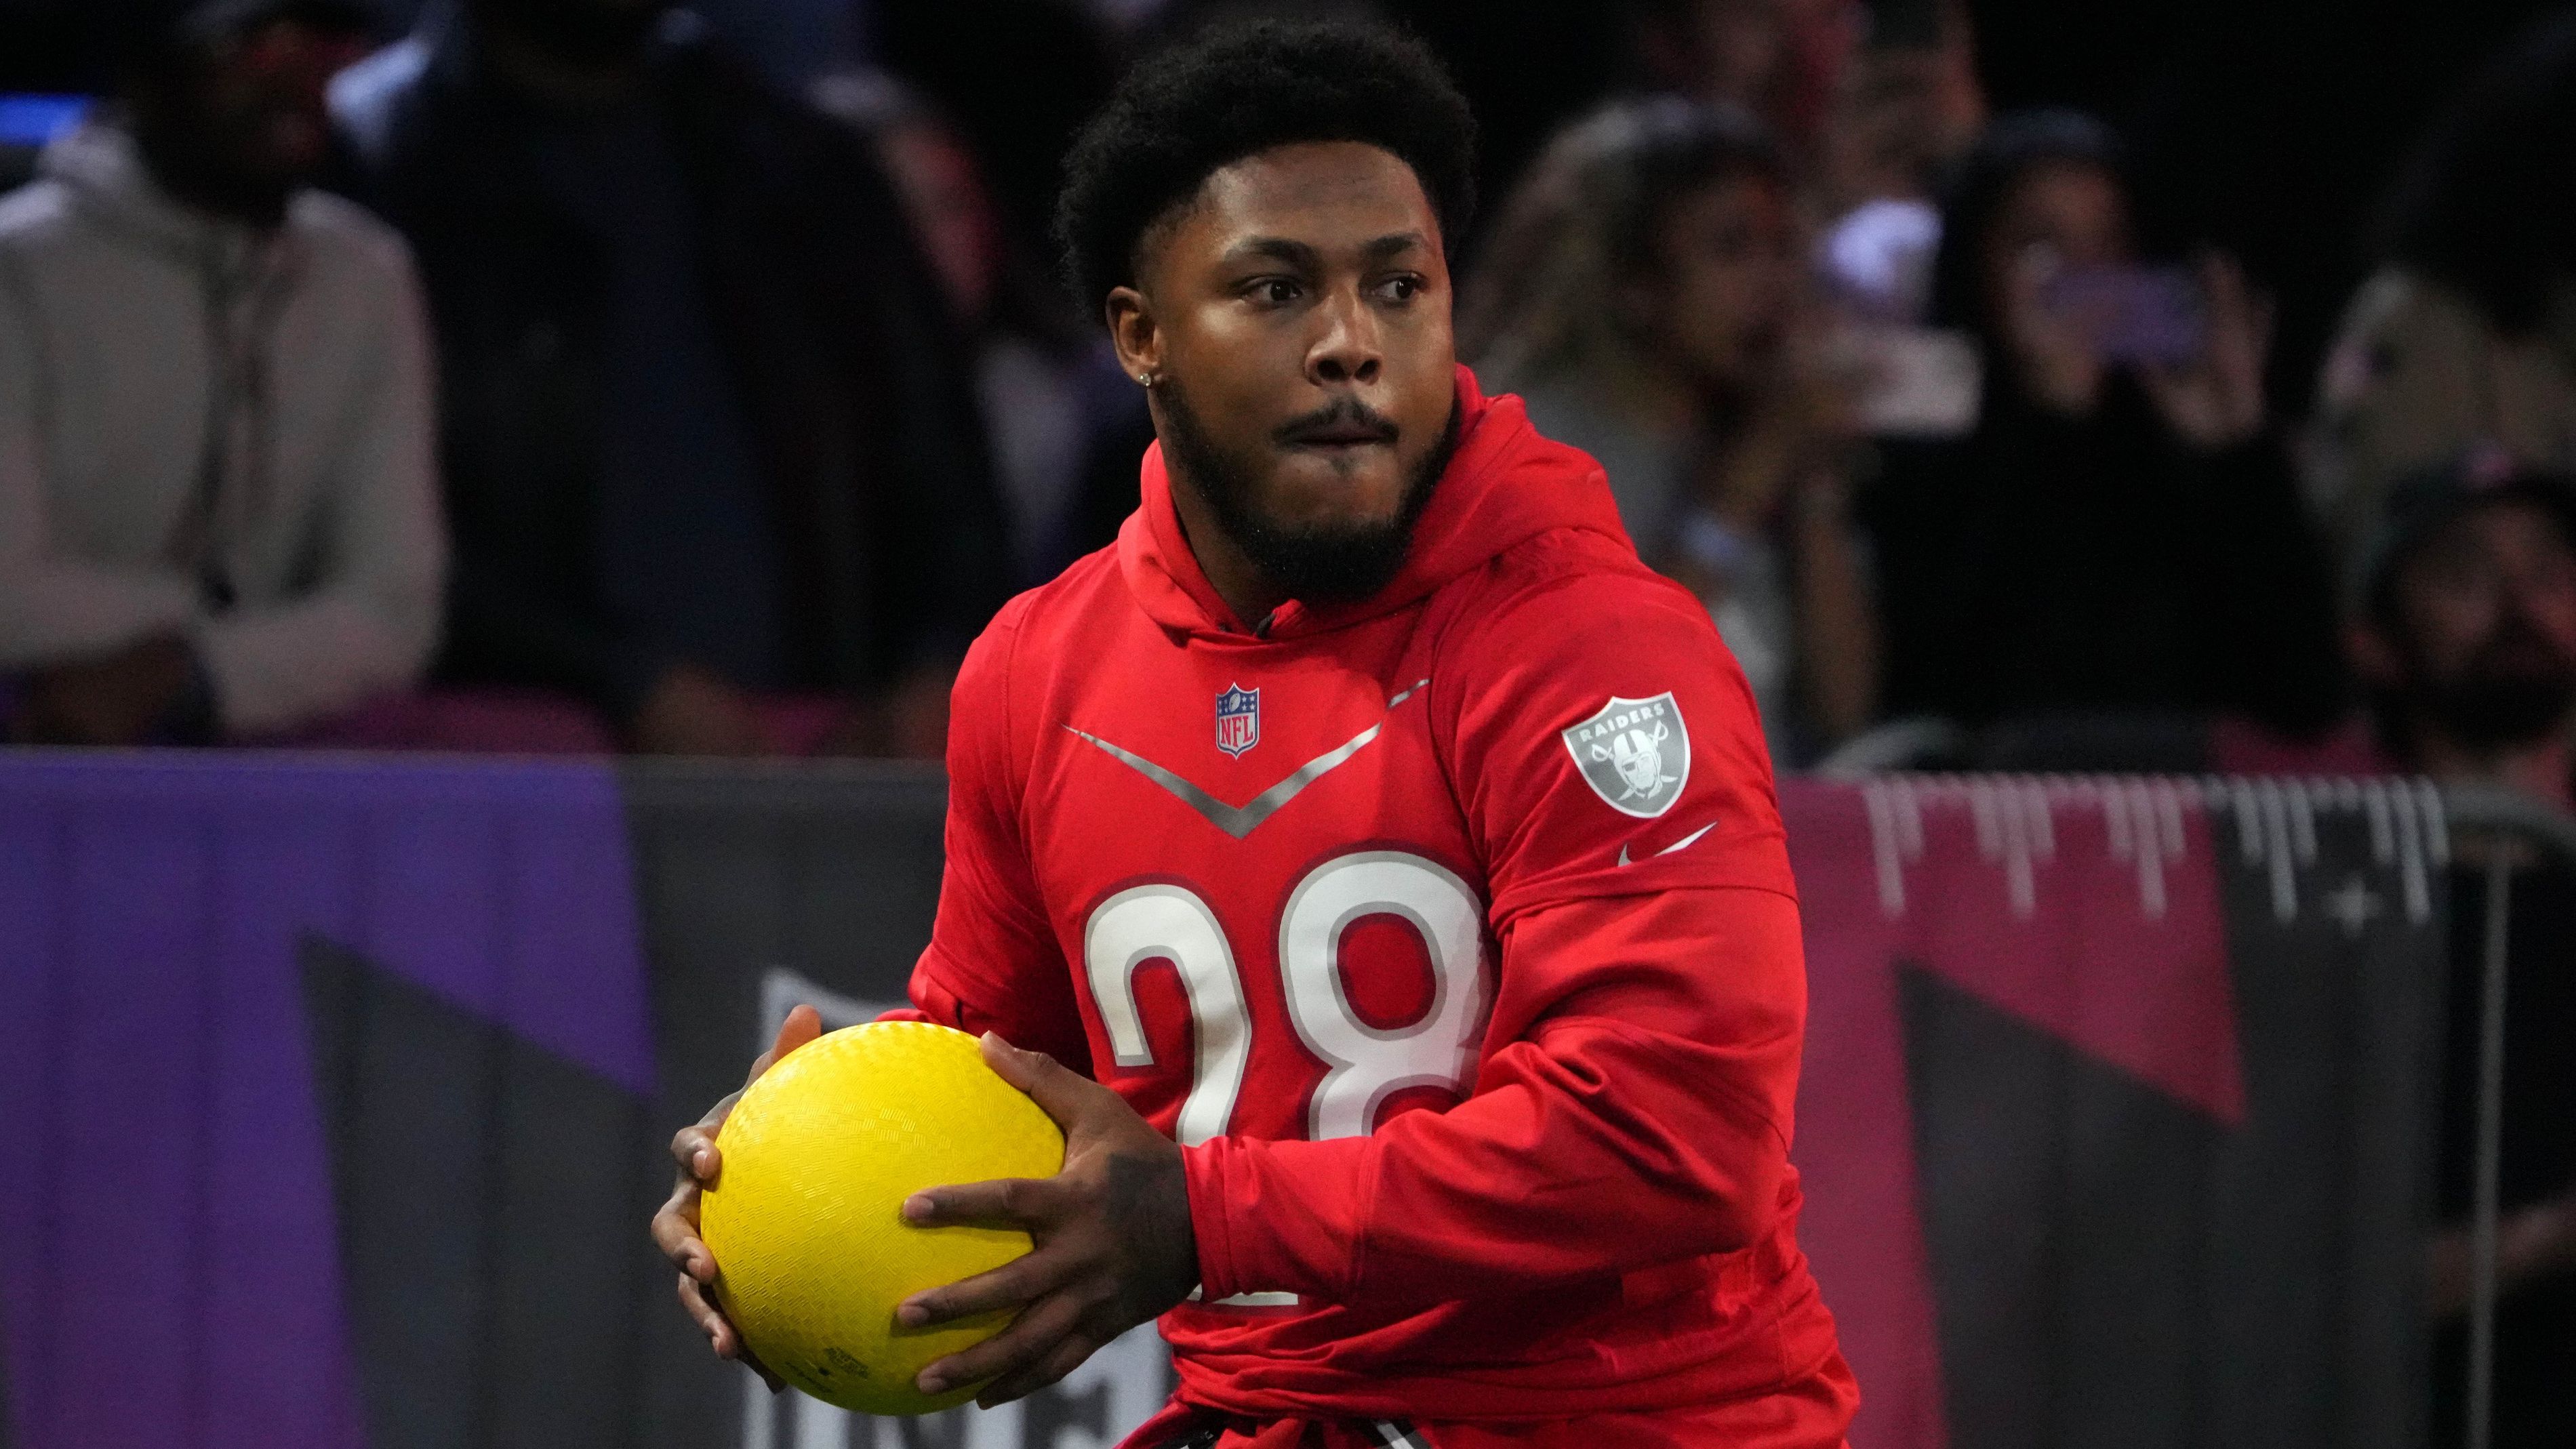 Feb 2, 2023; Henderson, NV, USA; Las Vegas Raiders running back Josh Jacobs (28) participates in dodge ball during the Pro Bowl Skills competition at the Intermountain Healthcare Performance Facility. Mandatory Credit: Kirby Lee-USA TODAY Sports